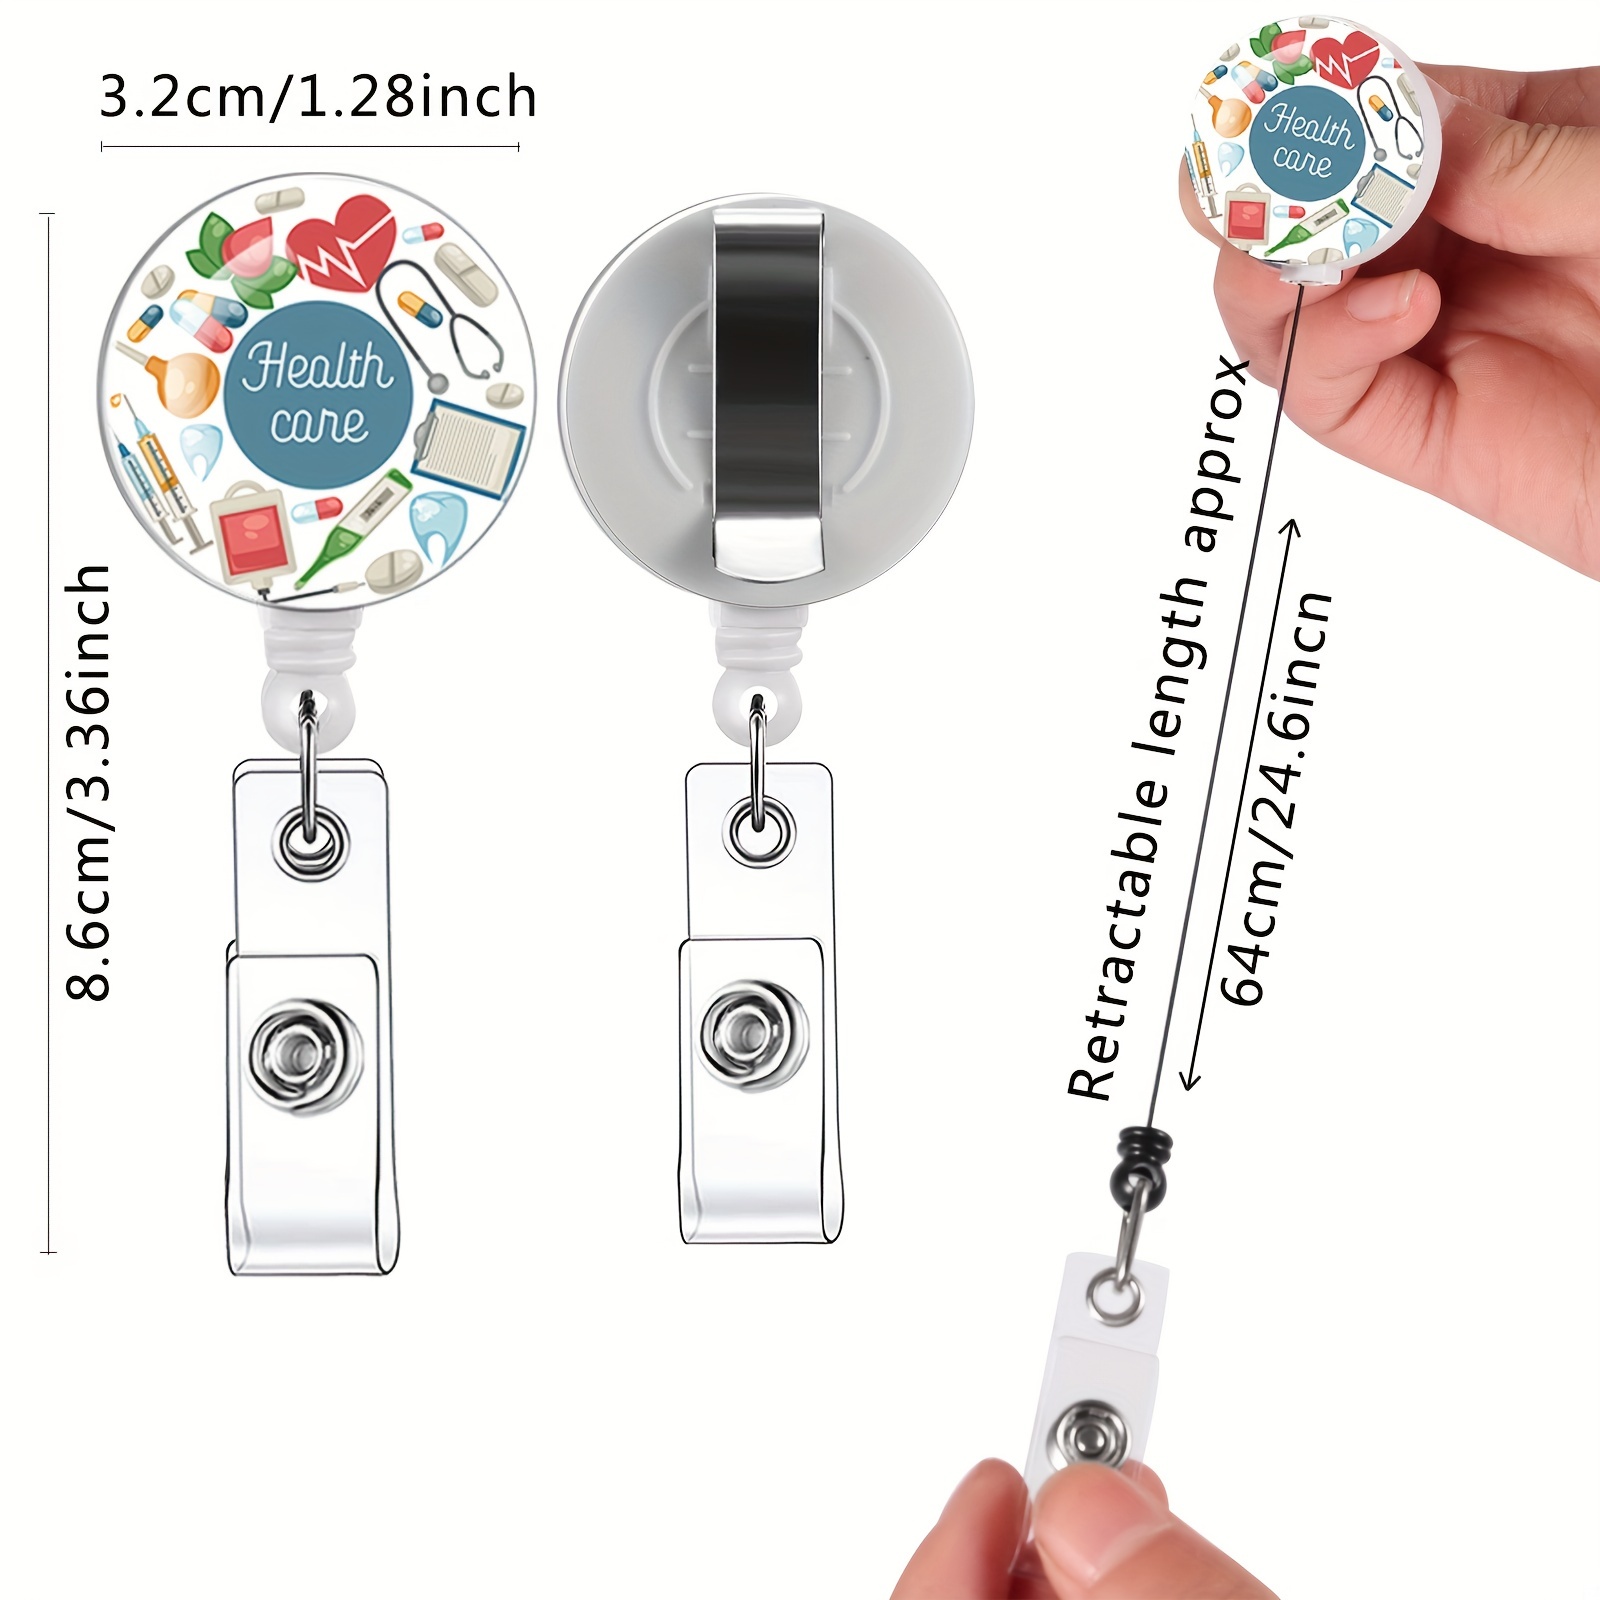 6pcs Pharmacy Badge Reel Medical Badge Reel,Creative Badge Reels Retractable Badge Holders Clip Perfect for Nurses, Students, and Office Workers